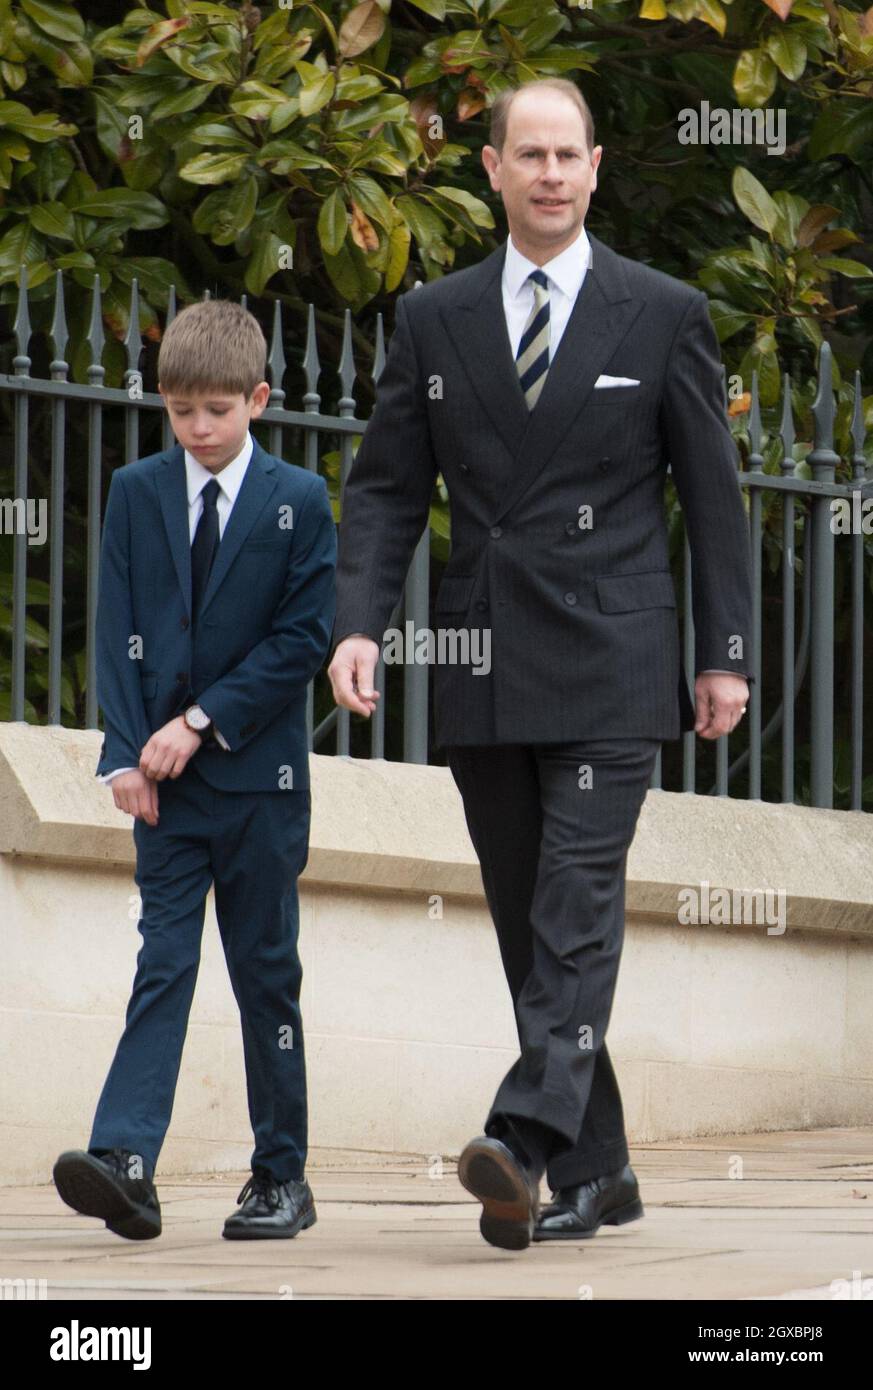 James, Viscount  Severn and Prince Edward, Earl of Wessex attend the Easter Sunday Service at St George's Chapel in Windsor on April 01, 2018. Stock Photo